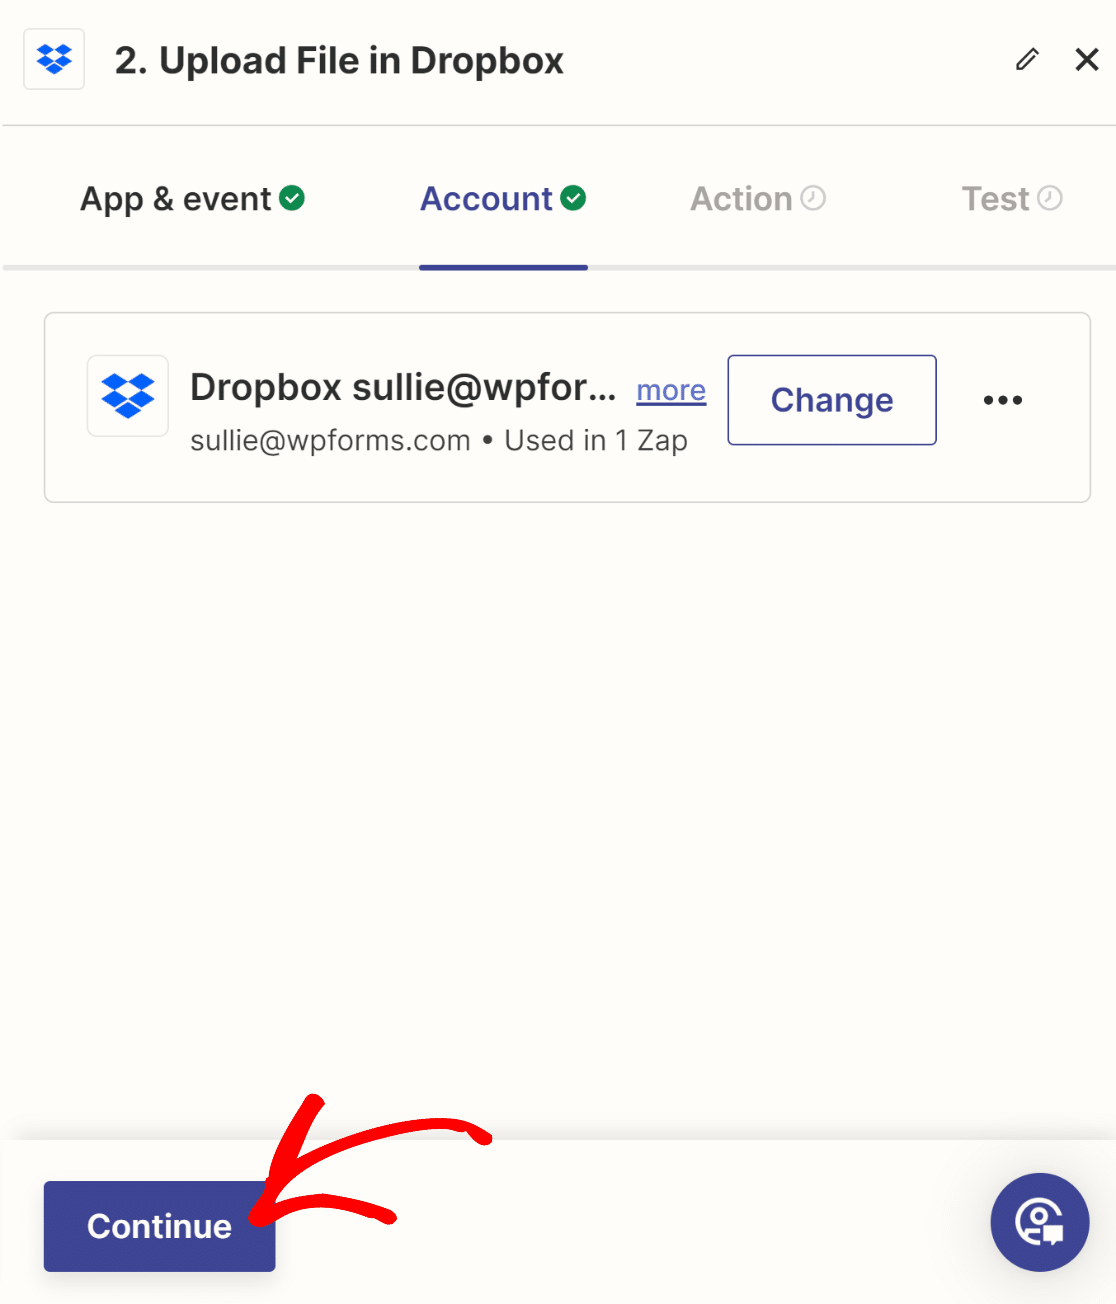 Dropbox connected with Zapier